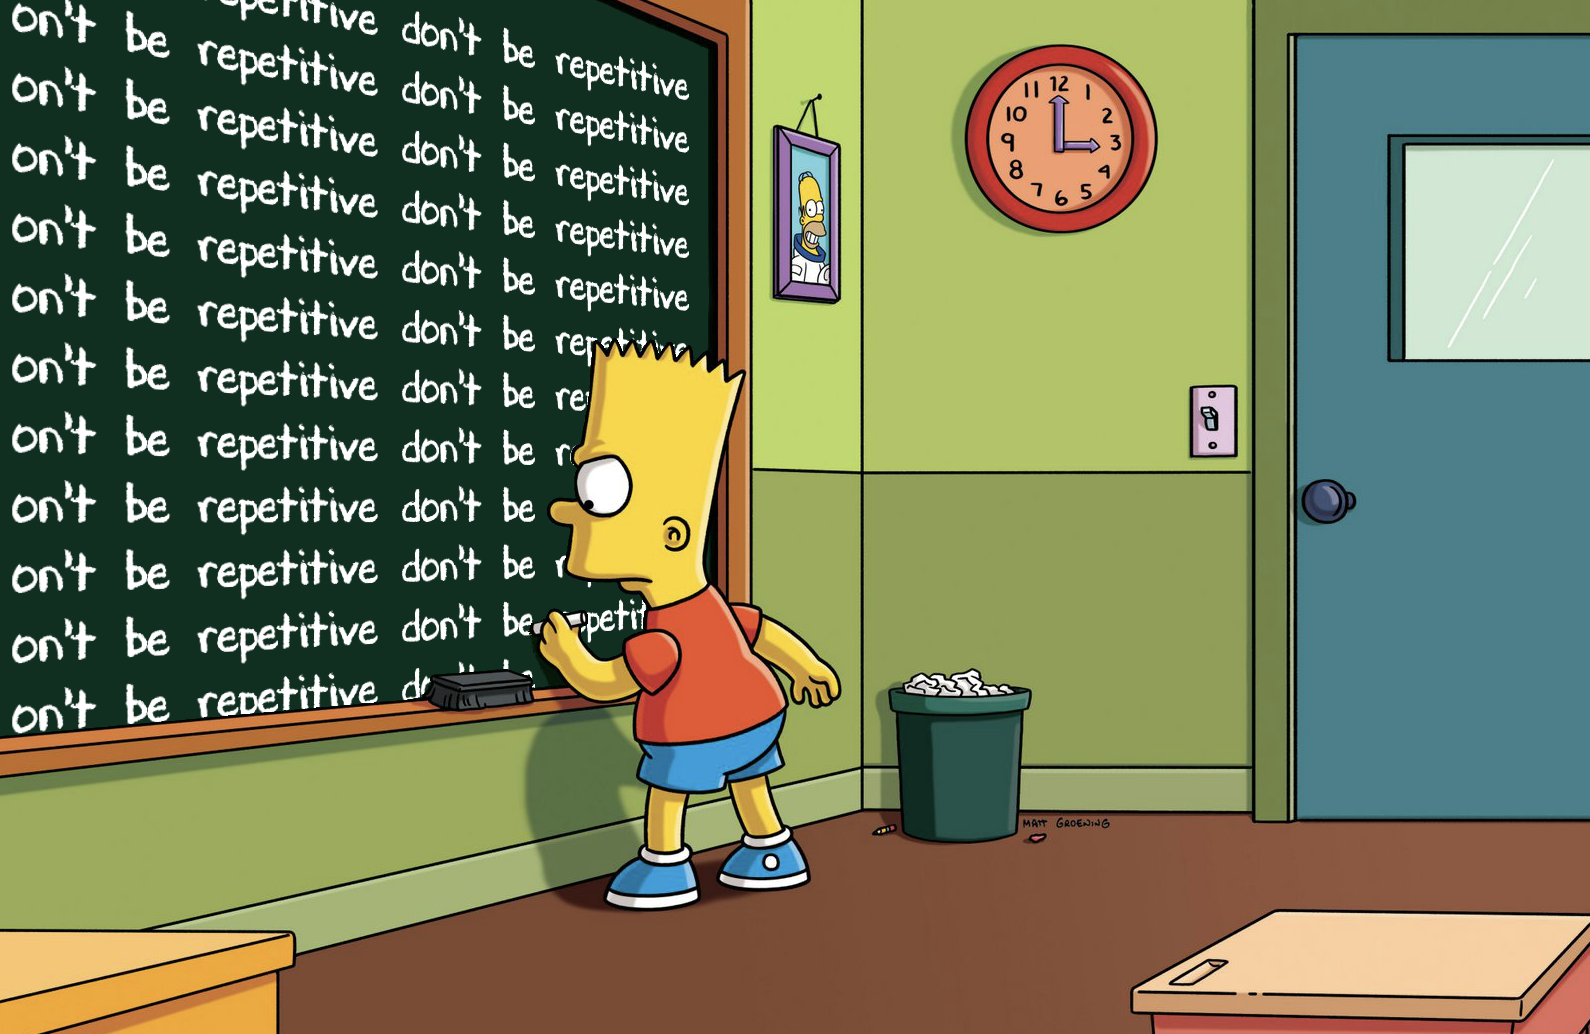 Bart Simpson writing lines saying "don't be repetitive" on a chalkboard